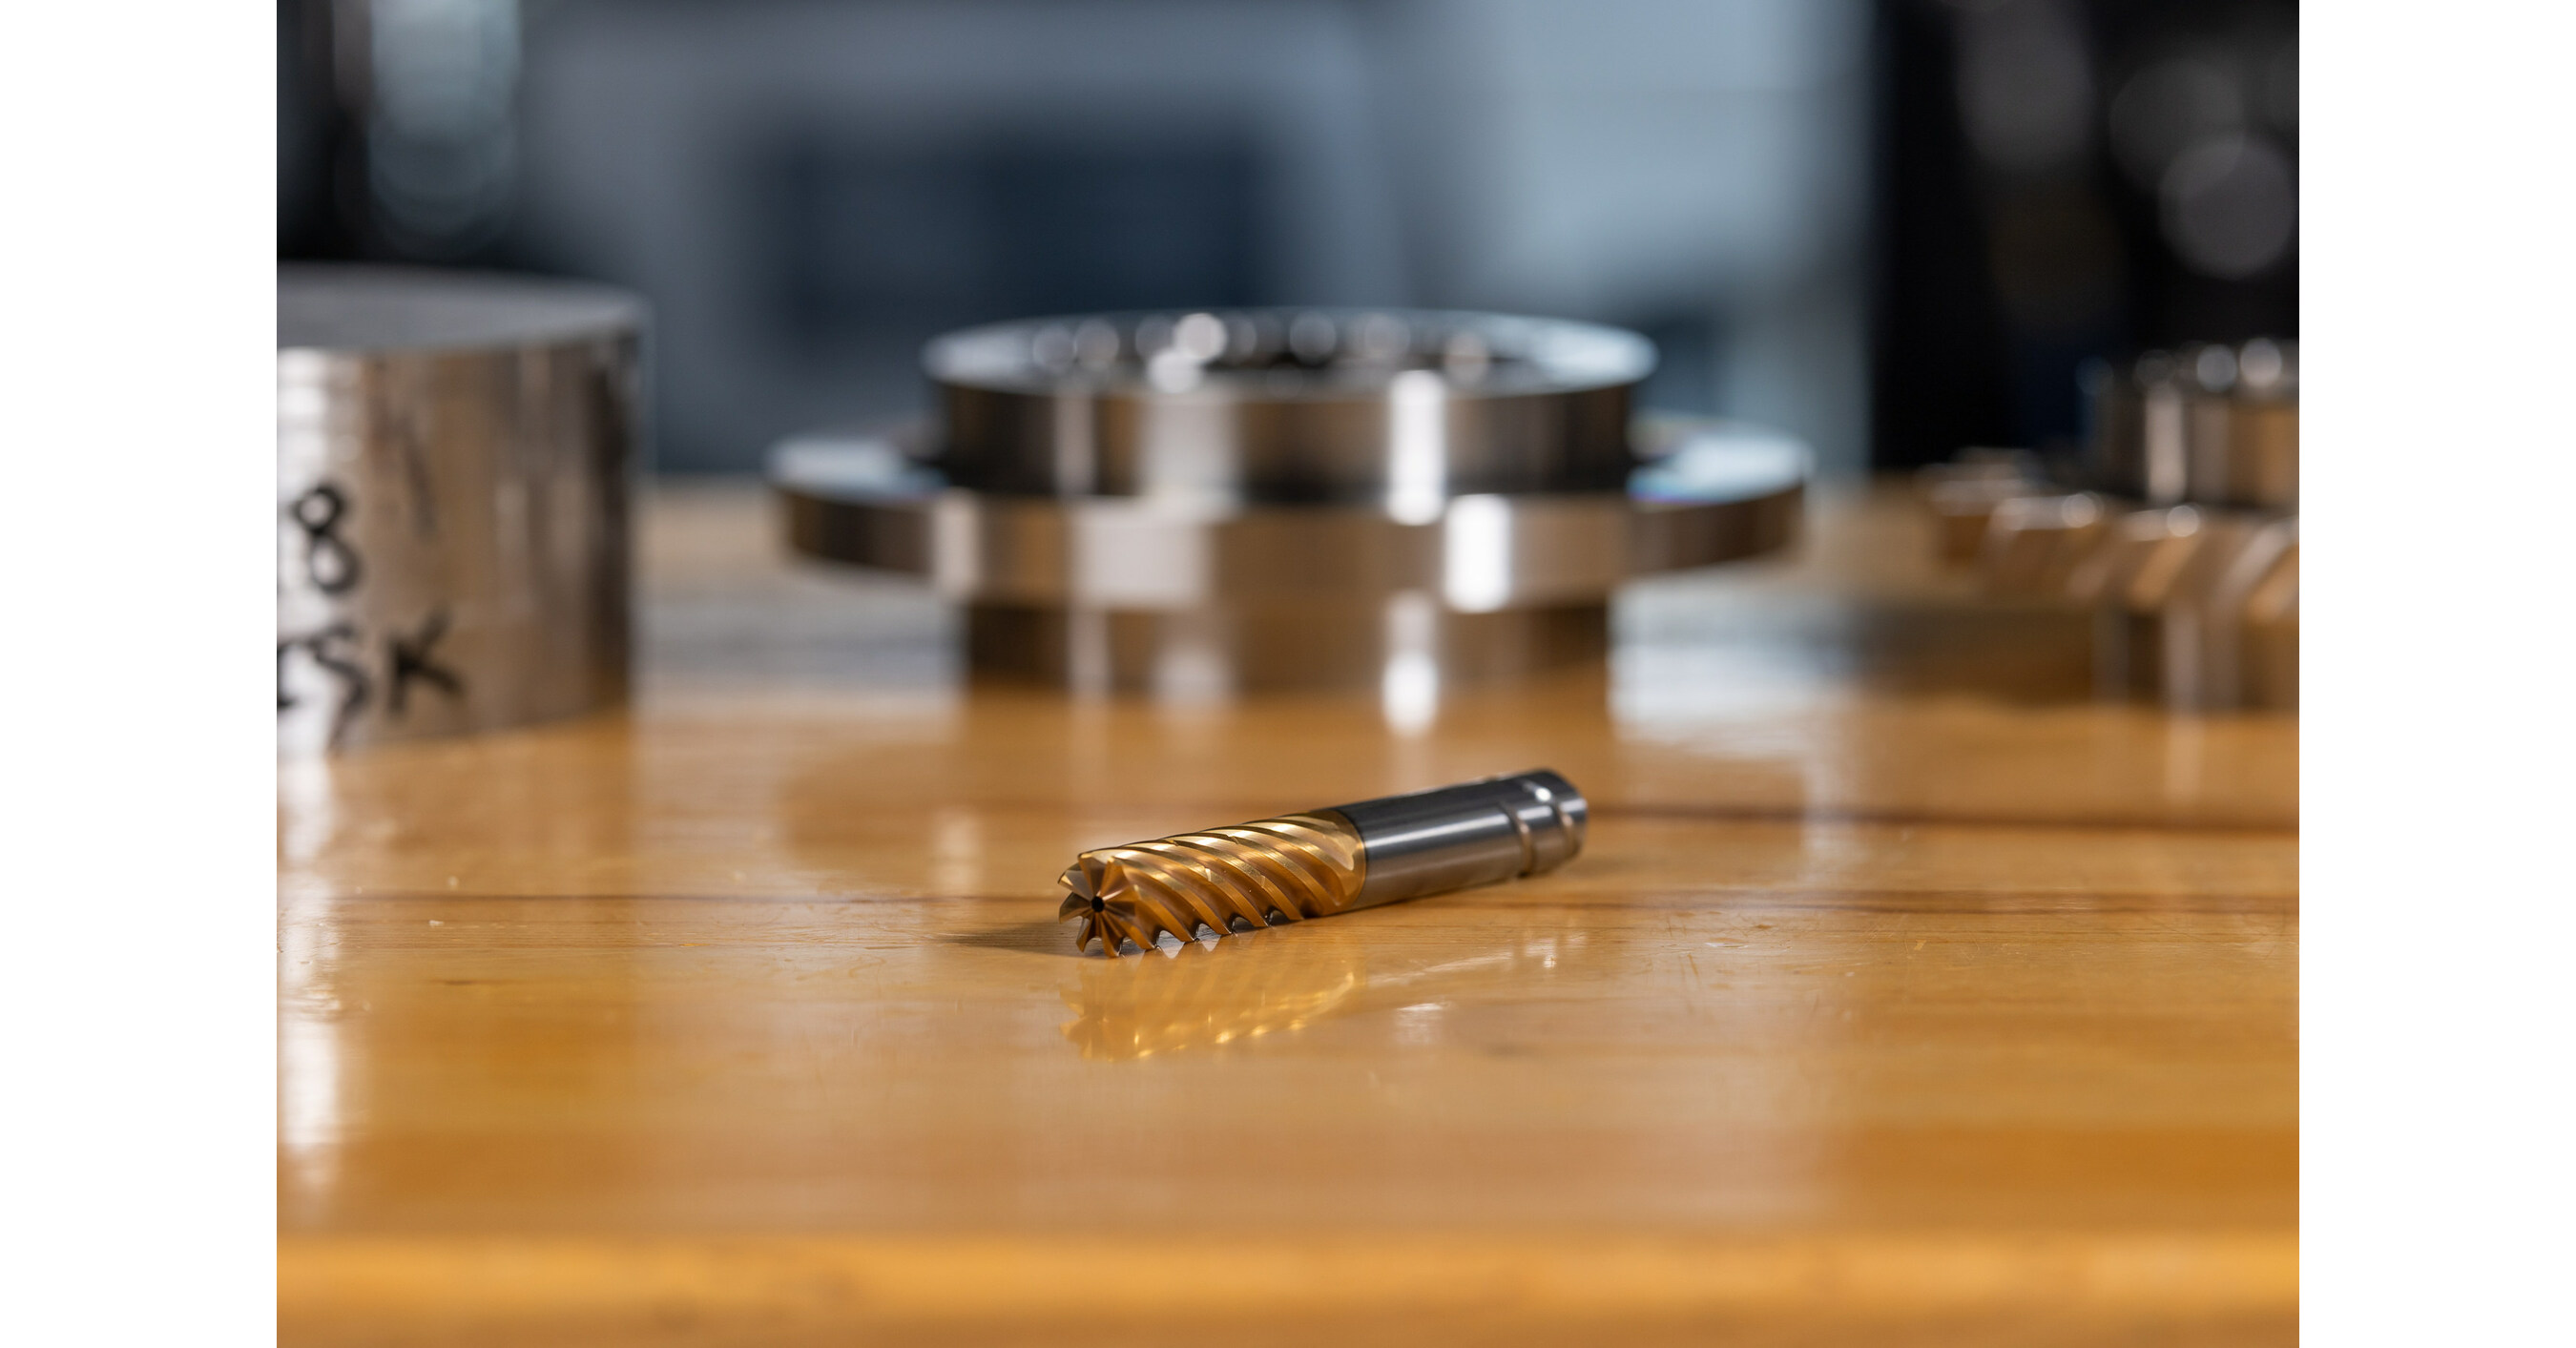 KENNAMETAL EXPANDS HARVI PORTFOLIO AND PERFORMANCE WITH FIRST-EVER 8-FLUTE END MILL